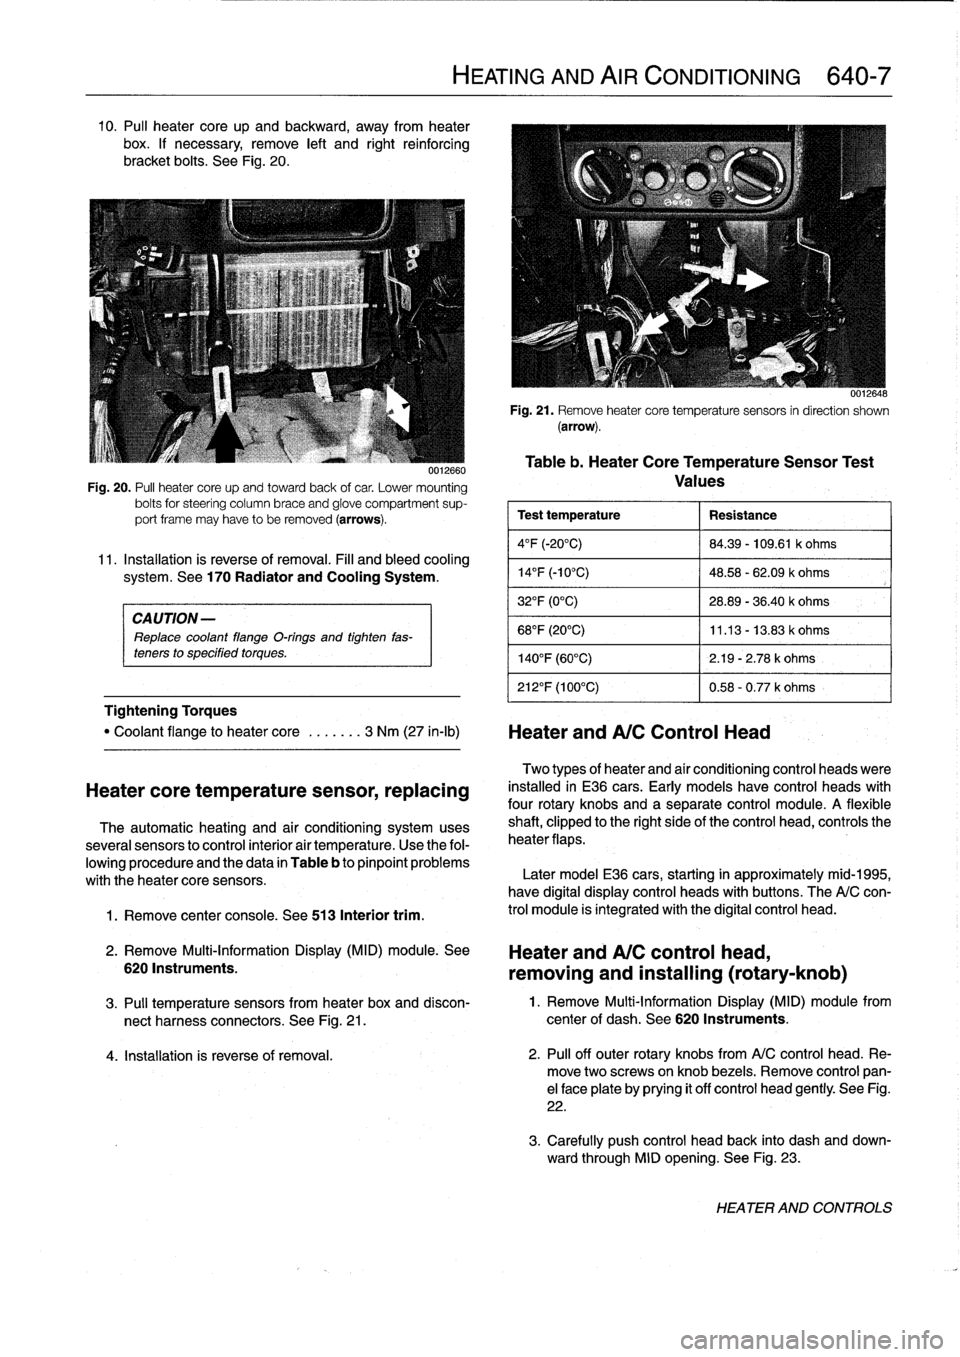 BMW 328i 1994 E36 Workshop Manual 10
.
Pul¡
heater
core
up
and
backward,
away
from
heater
box
.
If
necessary,
remove
left
and
right
reinforcing
bracket
bolts
.
See
Fig
.
20
.

CAUTION-

Replace
coolant
flange
O-rings
and
tighten
fas-